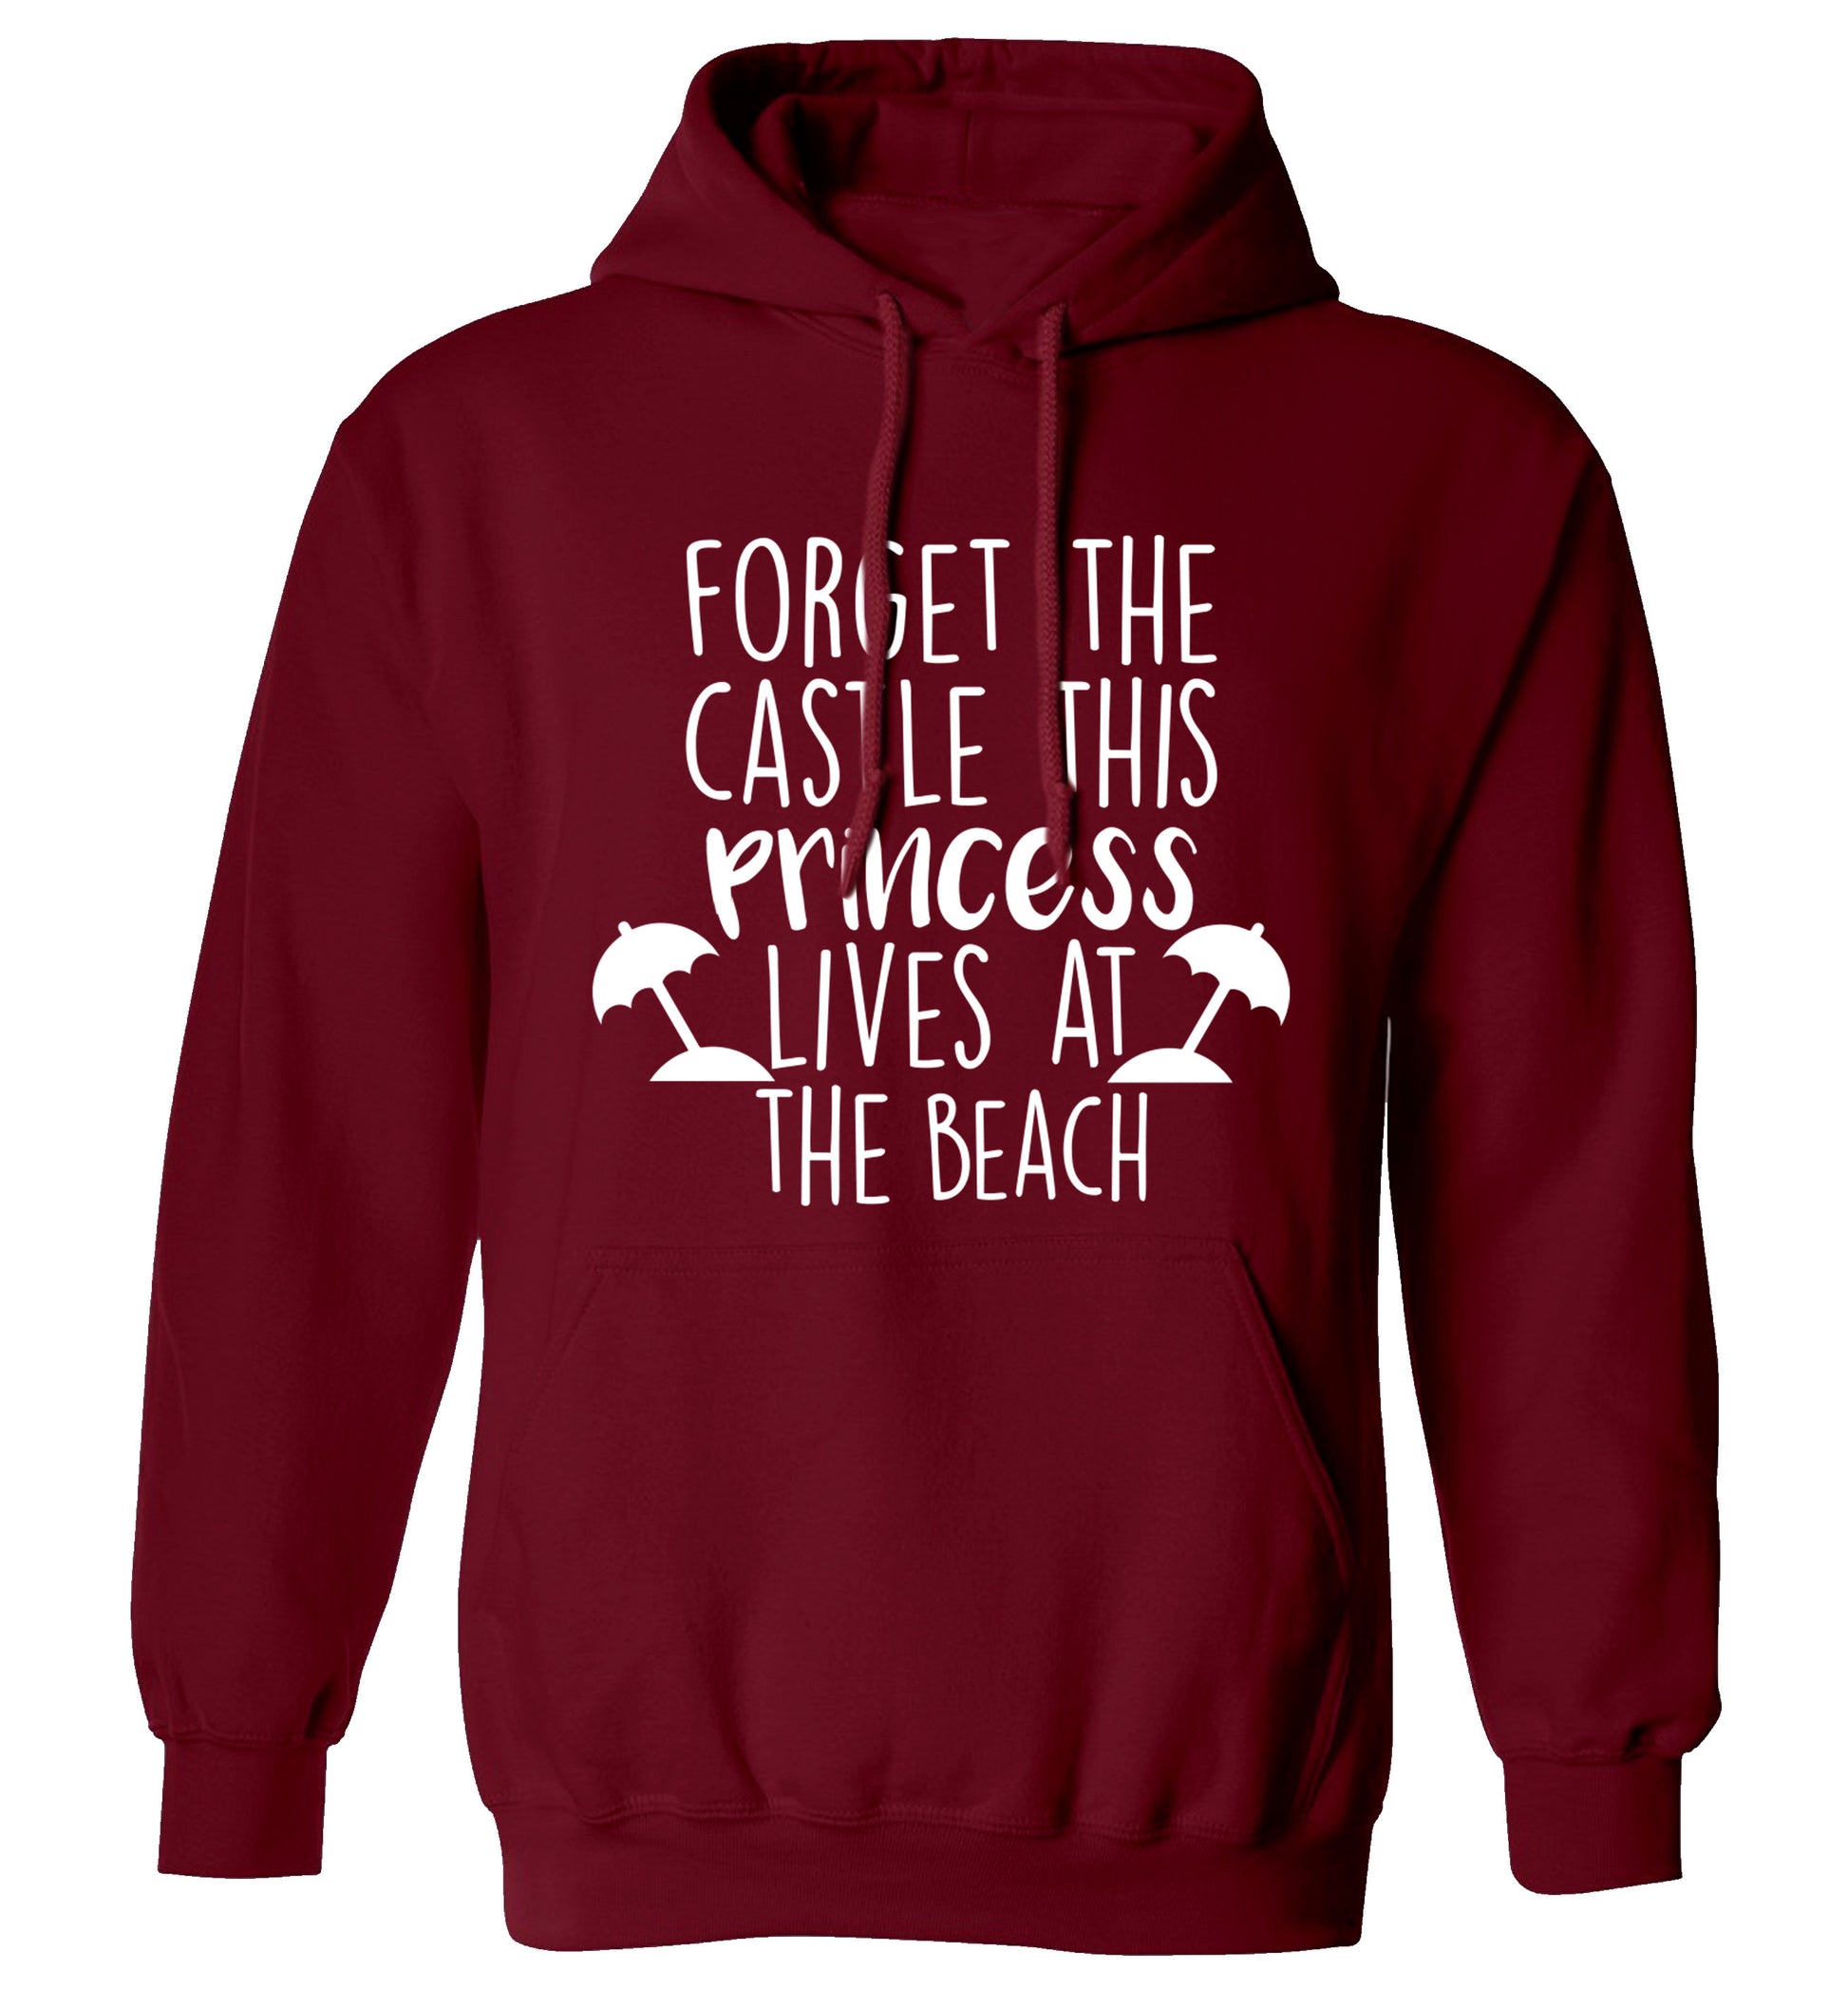 Forget the castle this princess lives at the beach adults unisex maroon hoodie 2XL